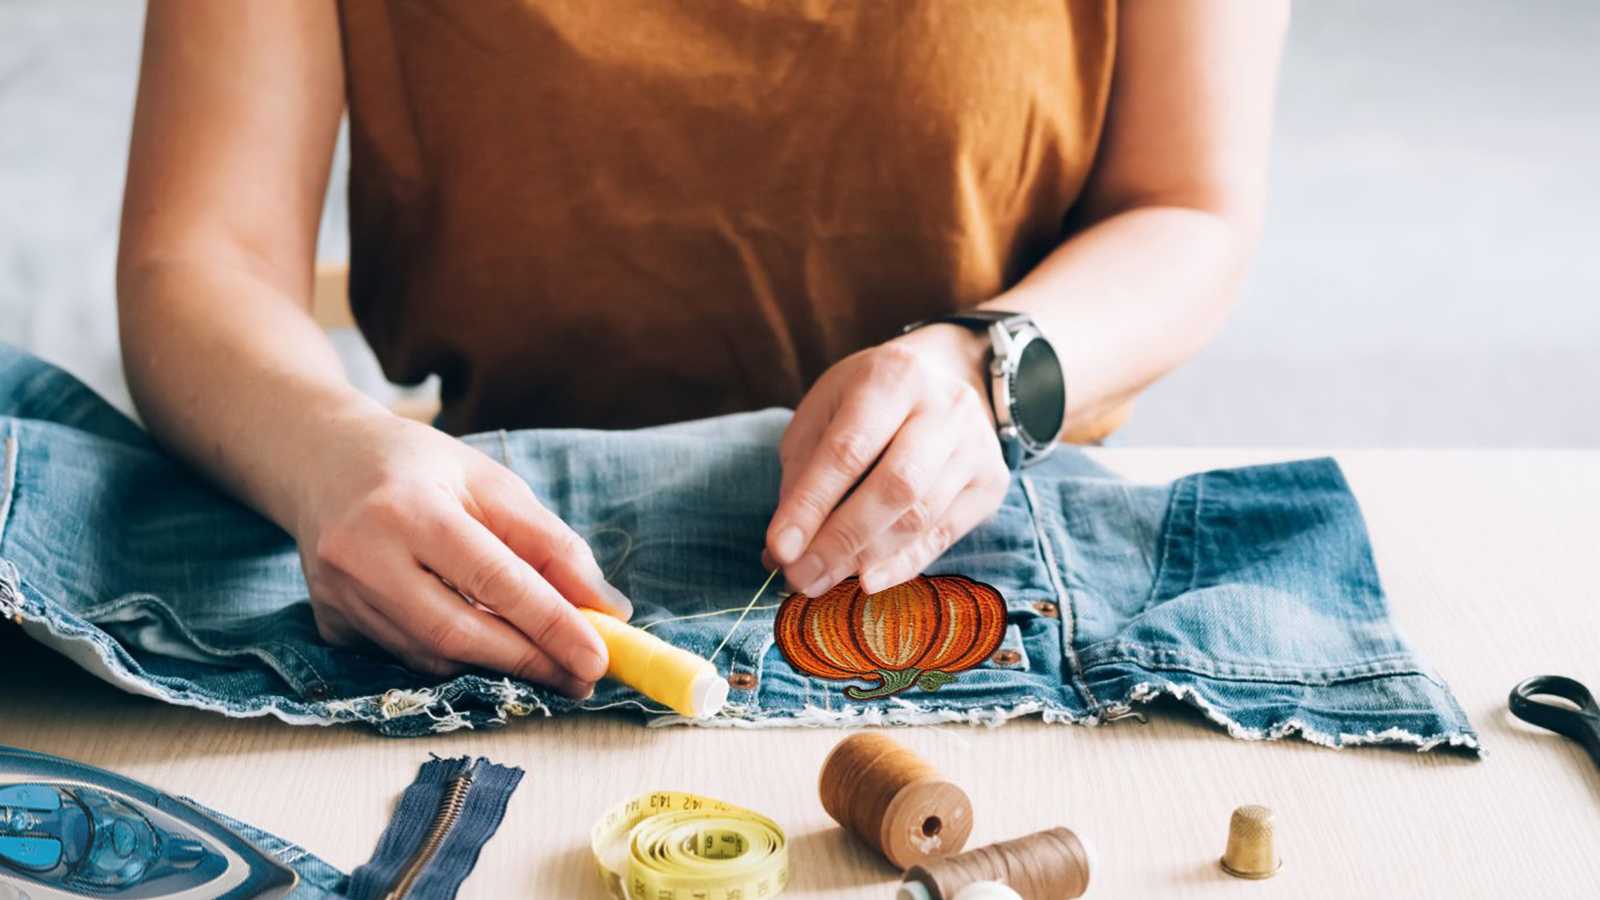 A woman is sewing a pair of jeans on a table.